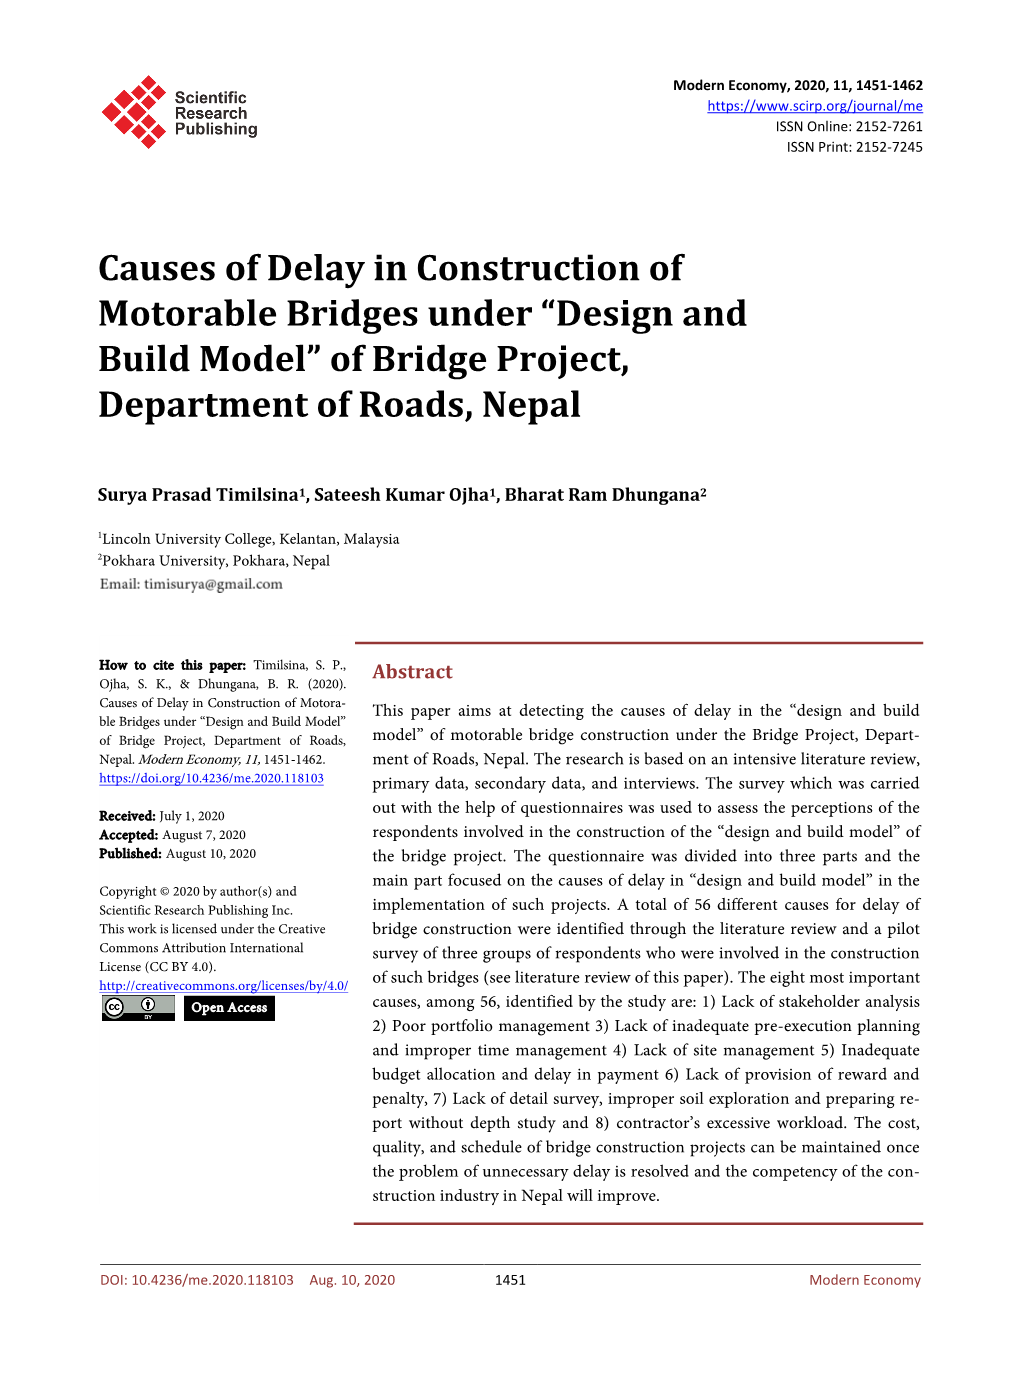 “Design and Build Model” of Bridge Project, Department of Roads, Nepal